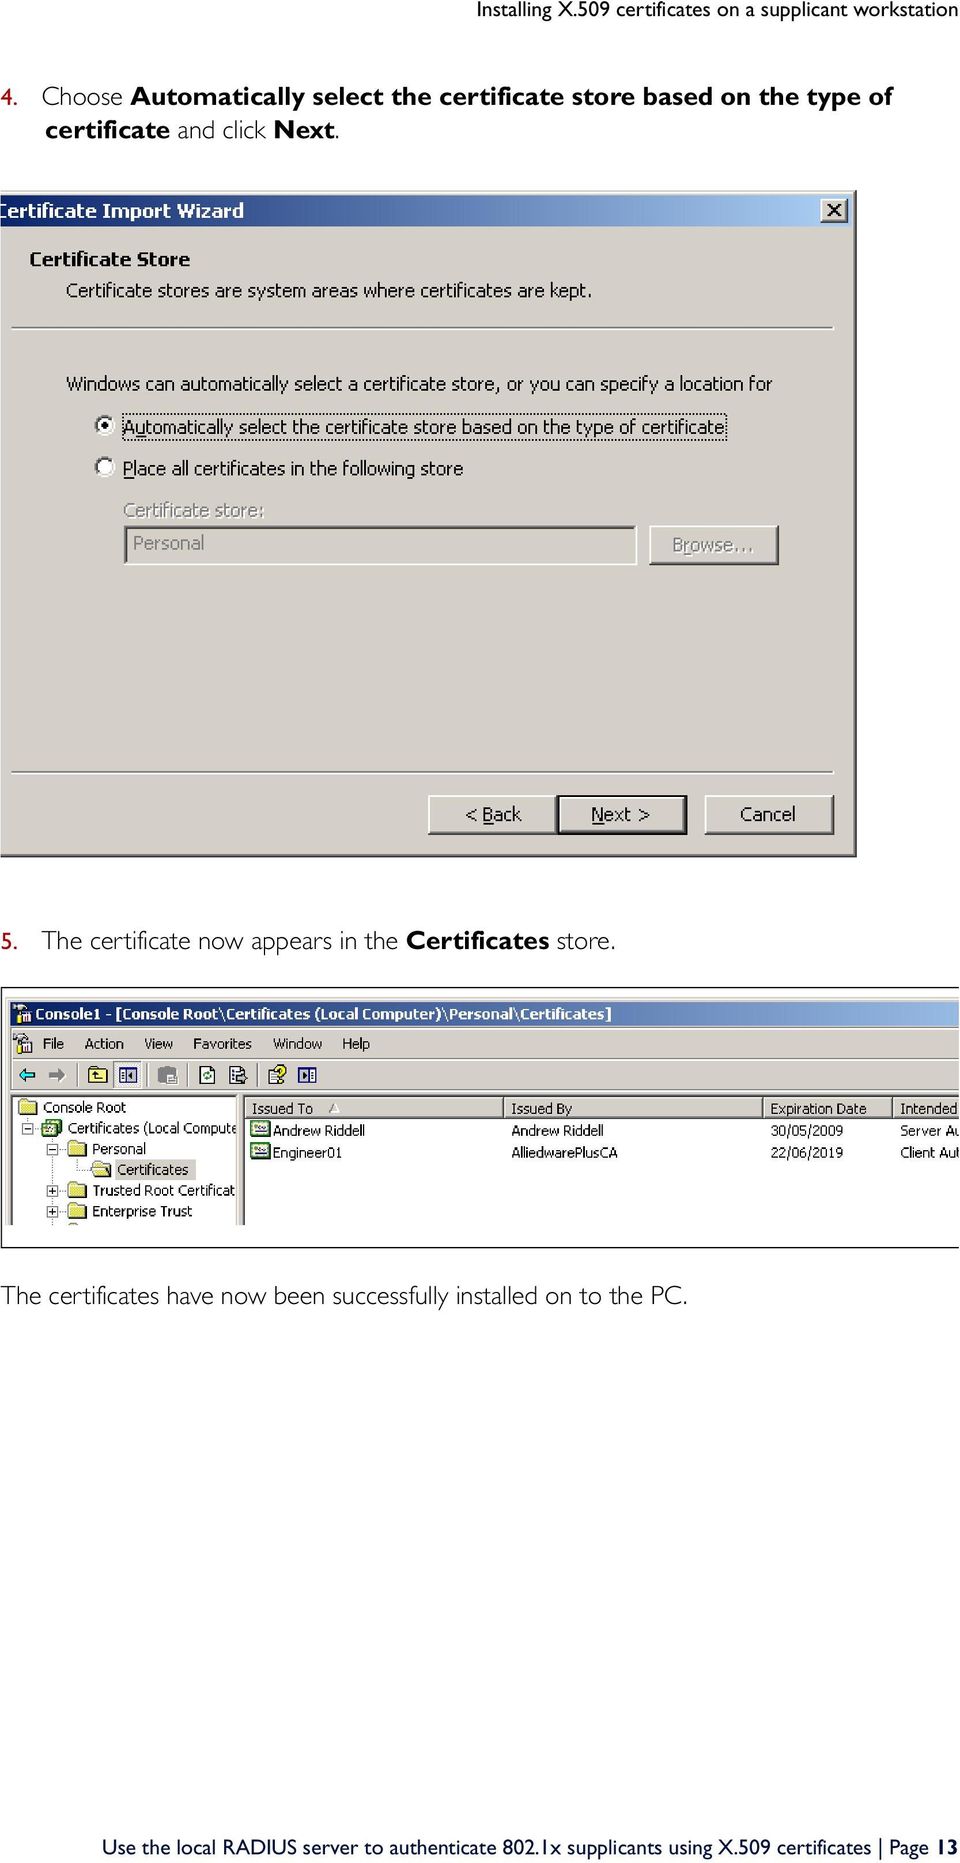 The certificate now appears in the Certificates store.